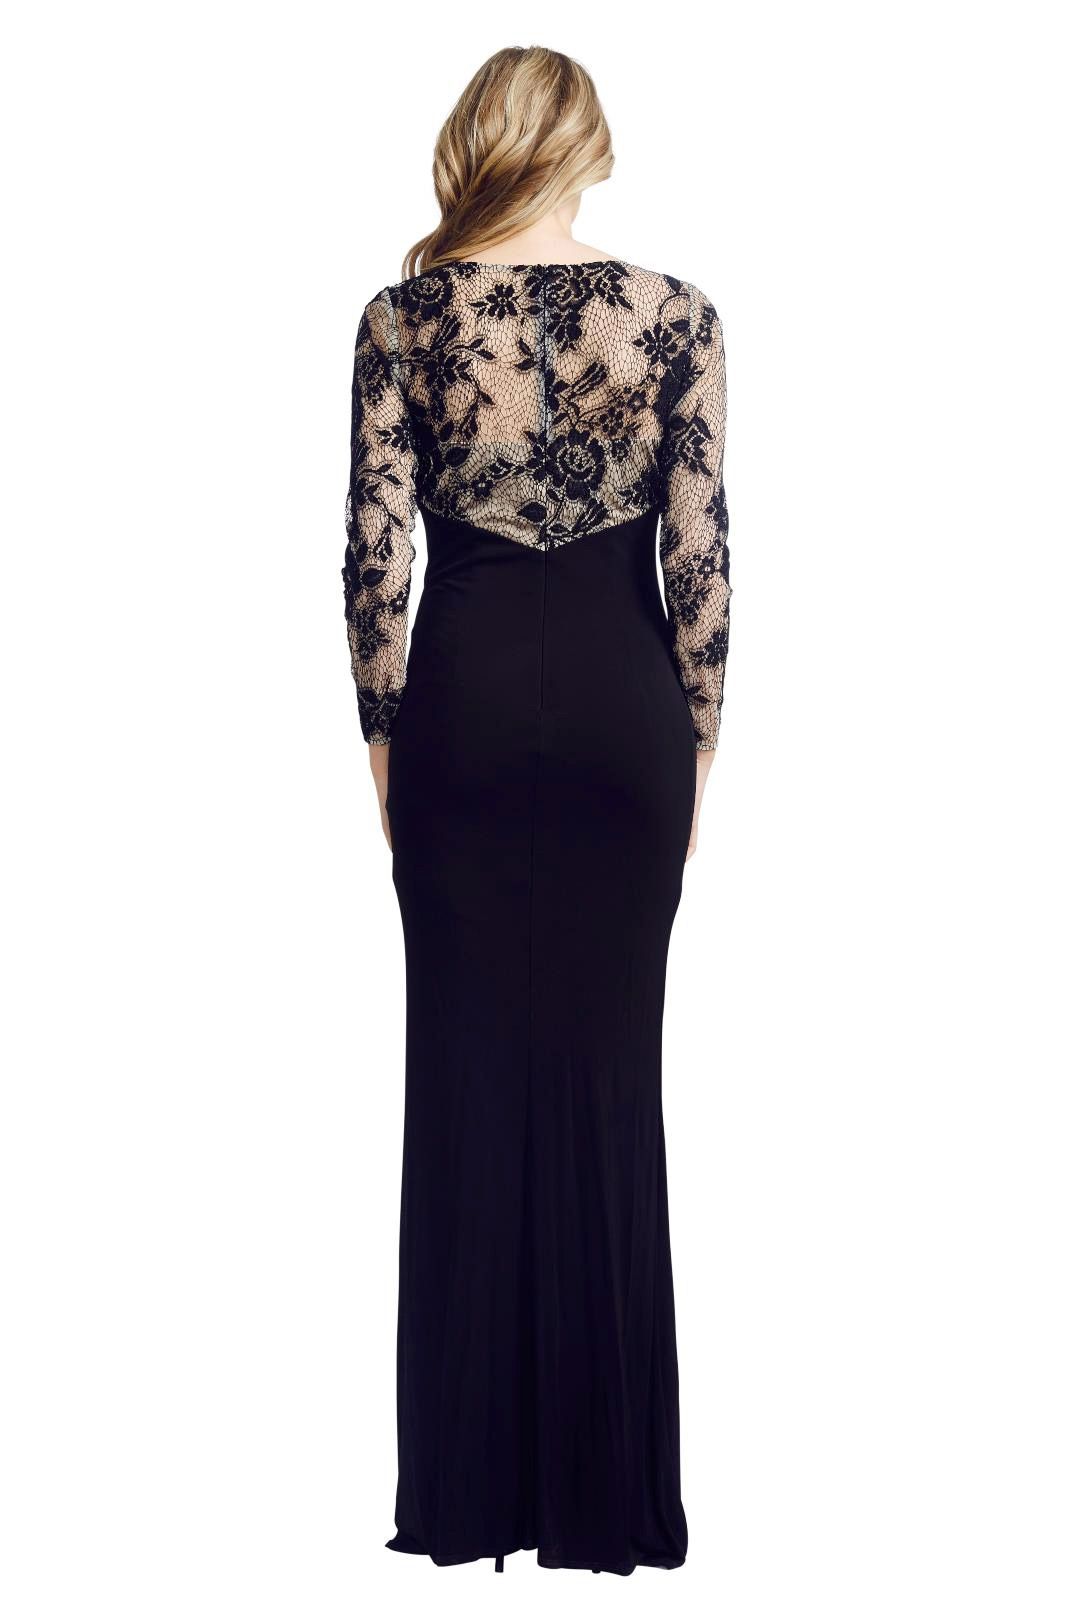 David Meister - Illusion Lace Gown - Black - Back3